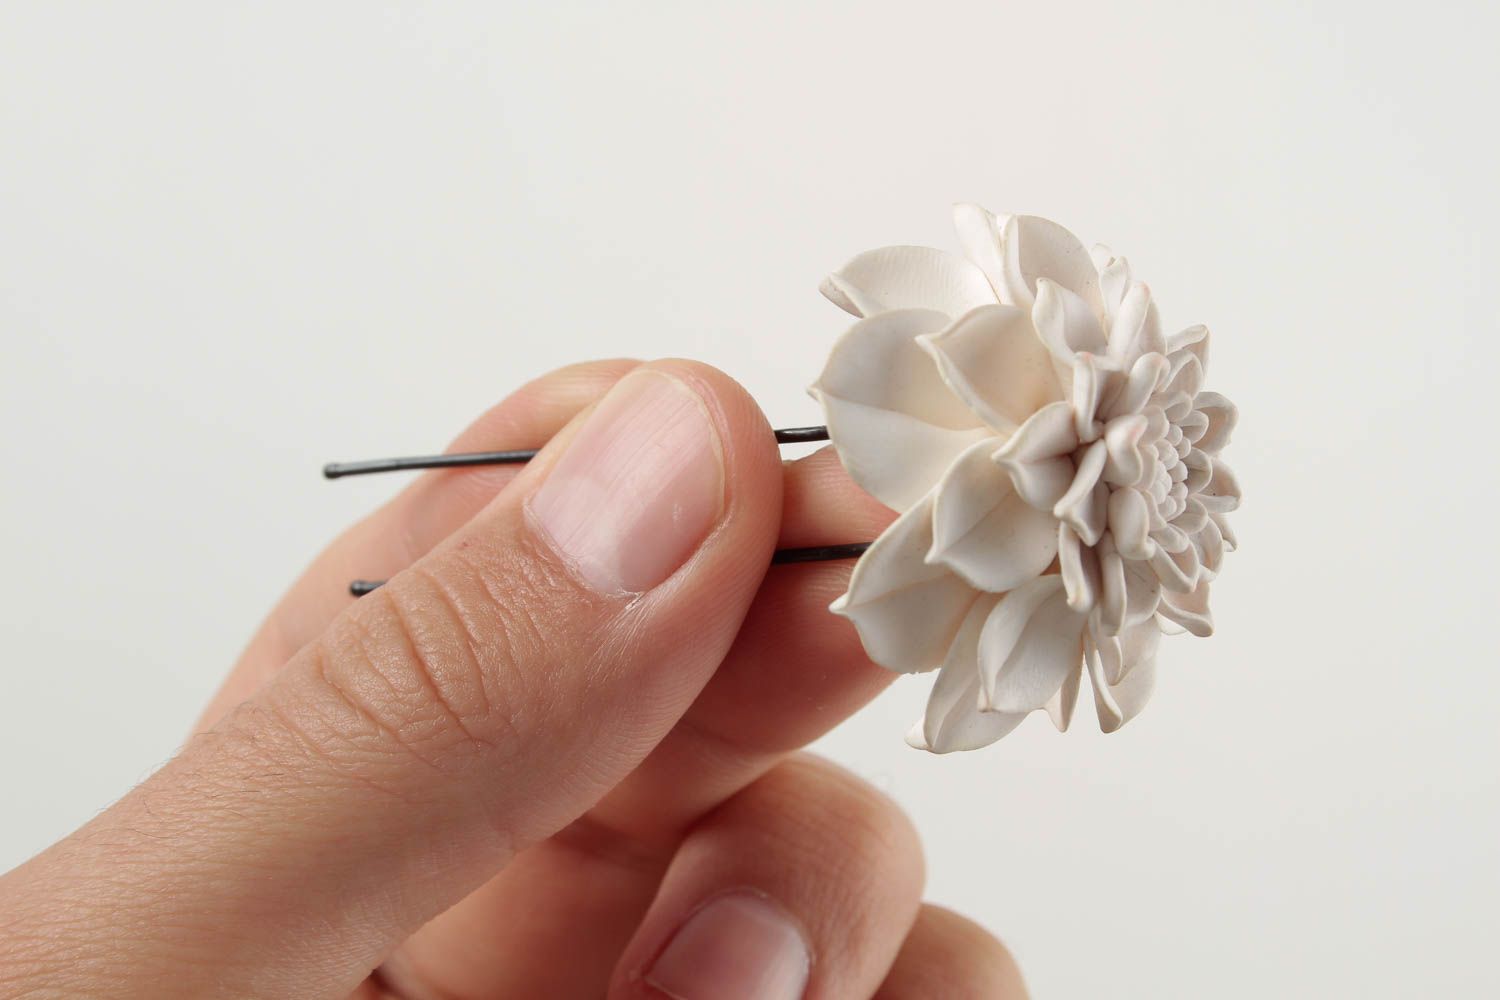 Stylish handmade hair pin plastic flower hairpin polymer clay ideas gift for her photo 2